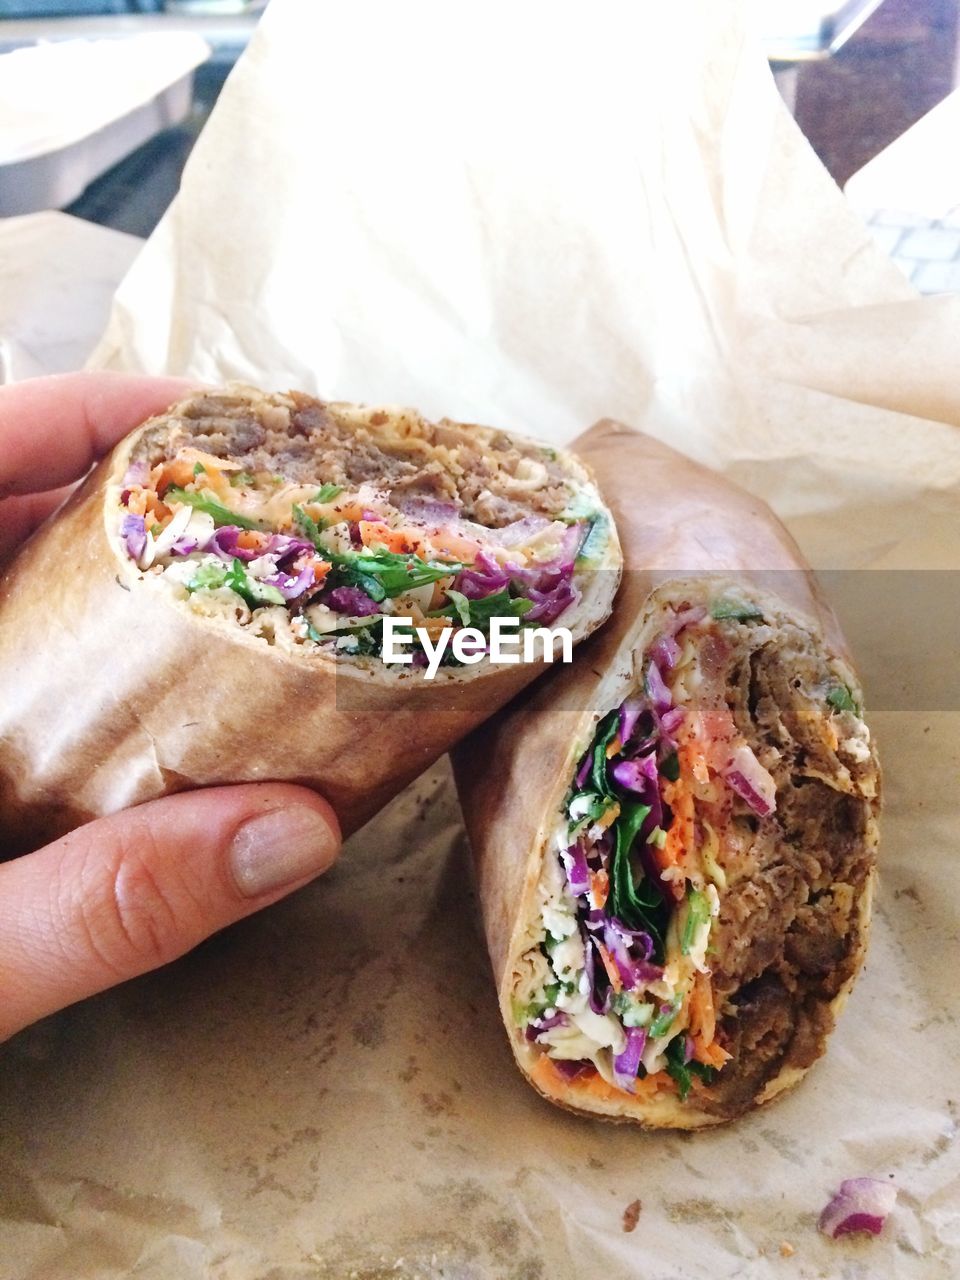 CROPPED IMAGE OF HAND HOLDING FOOD